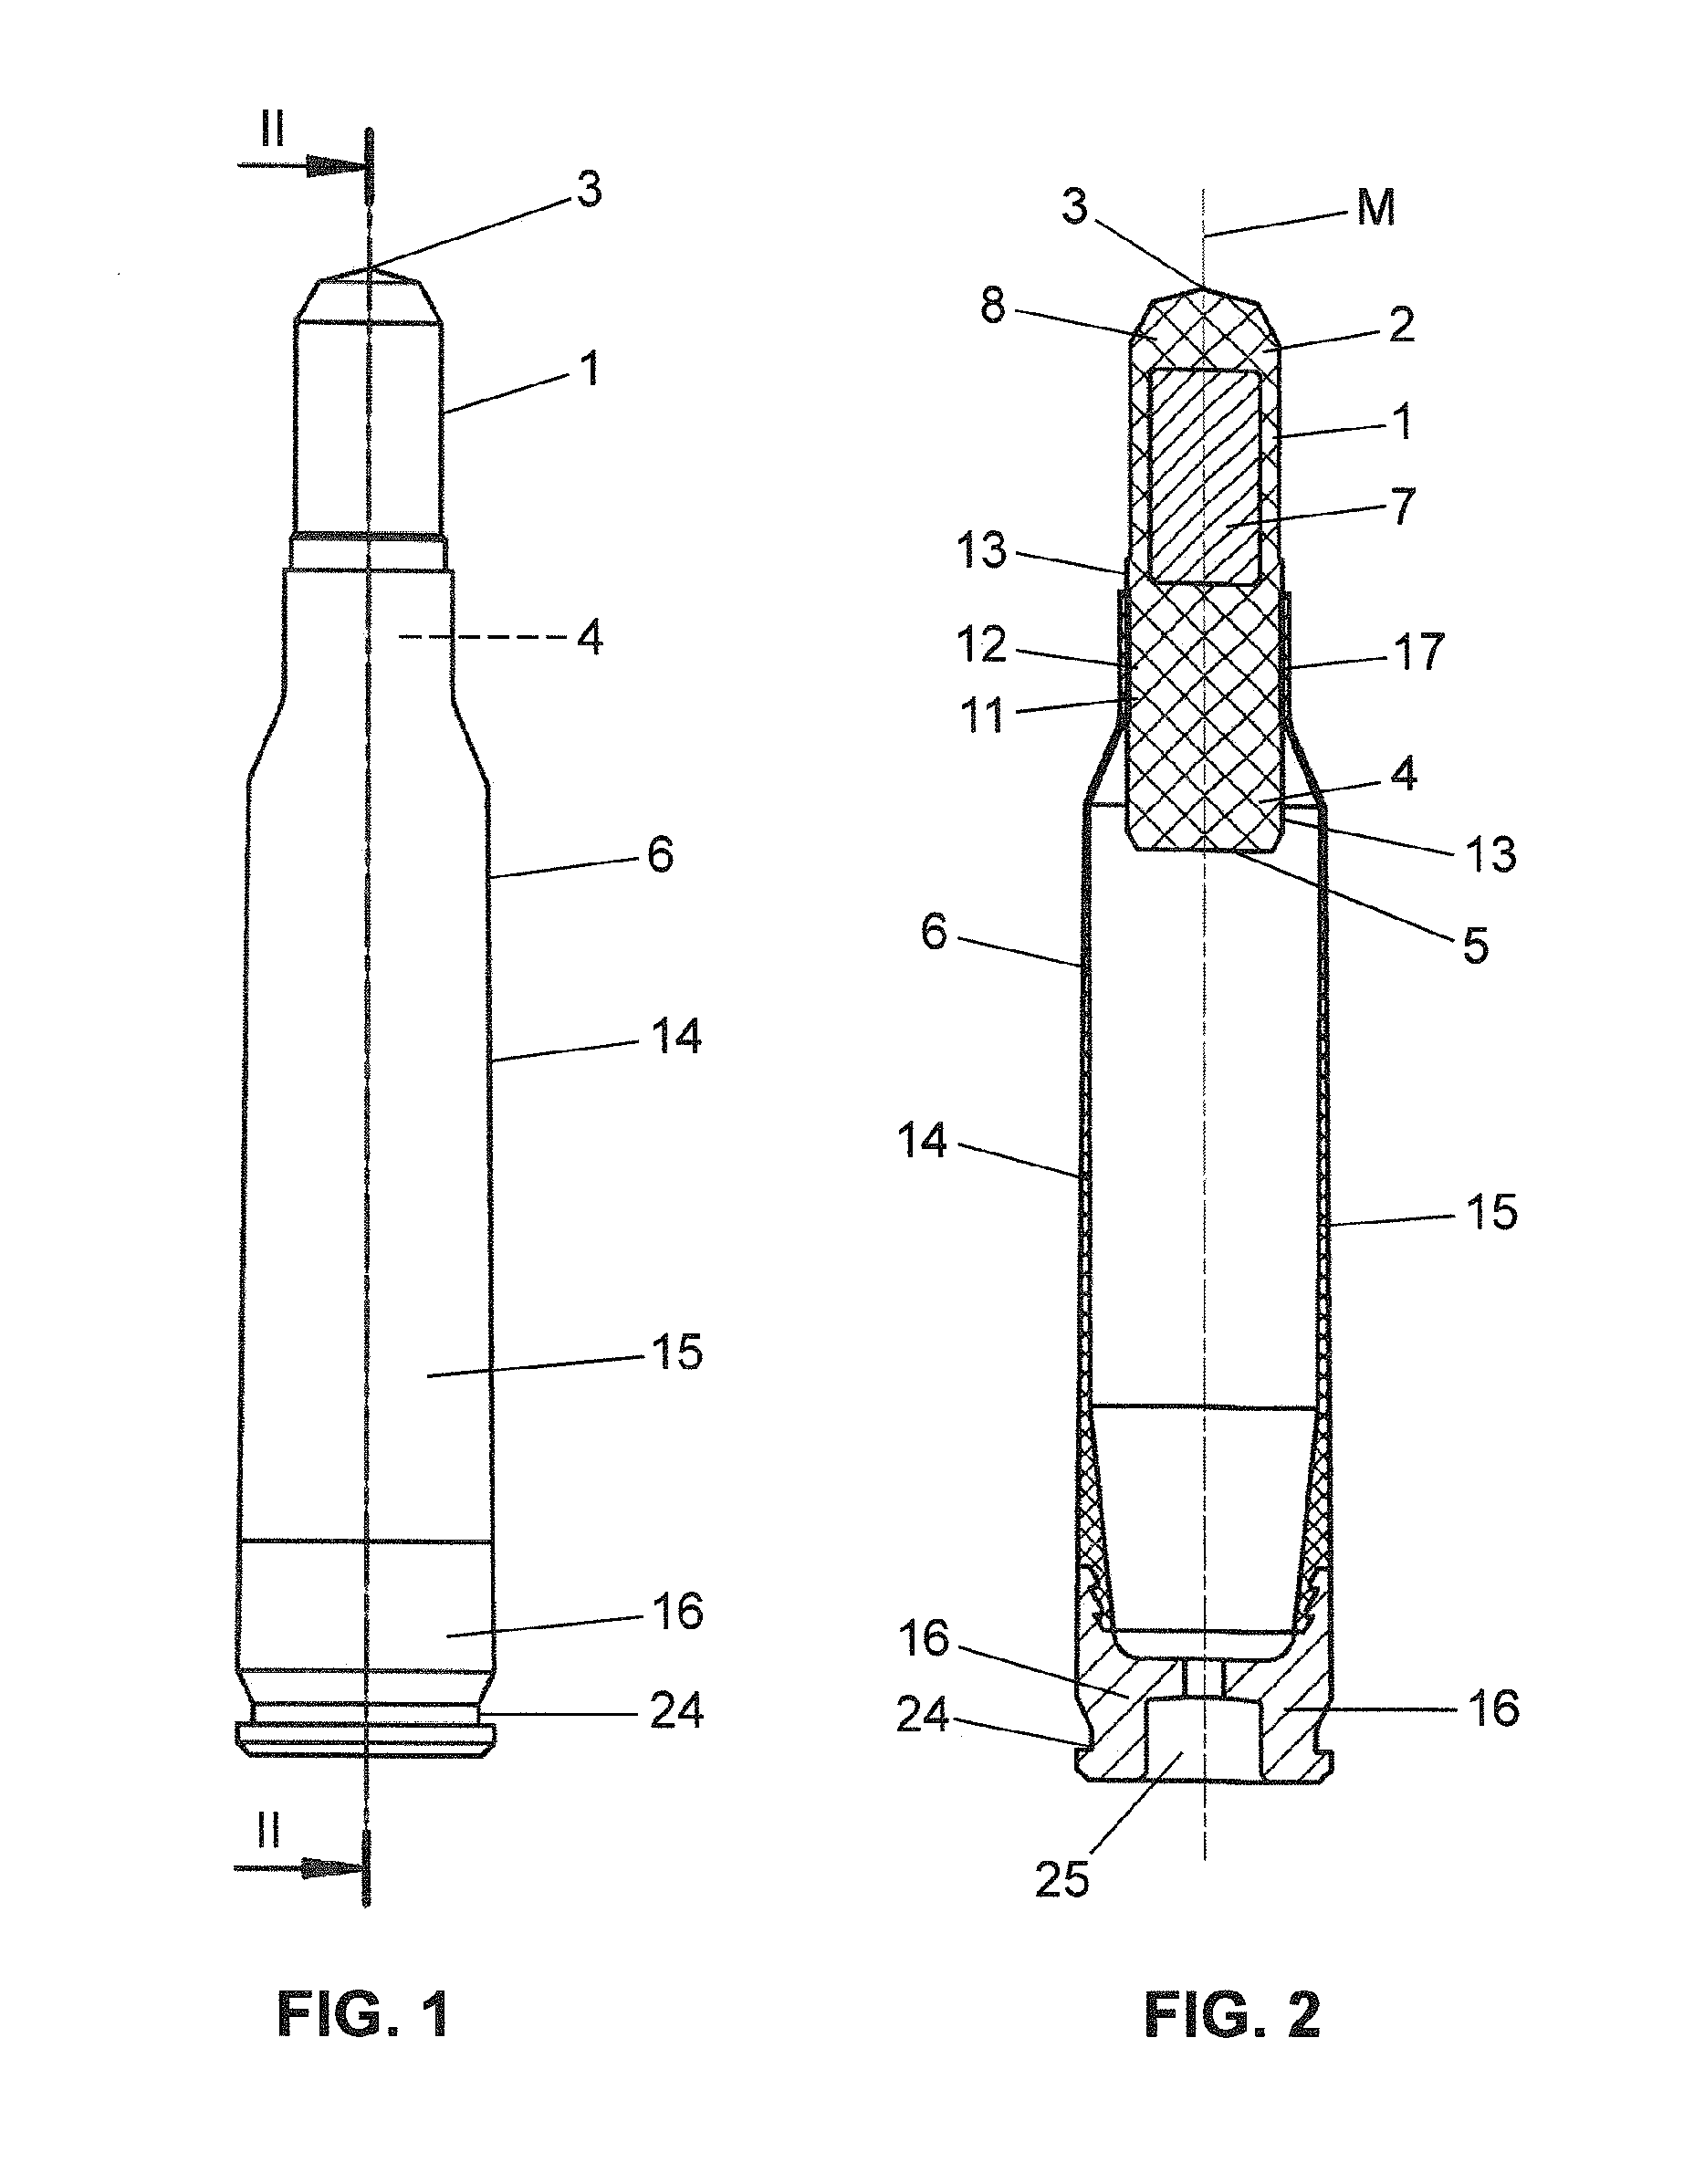 Training Projectile and Training Cartridge